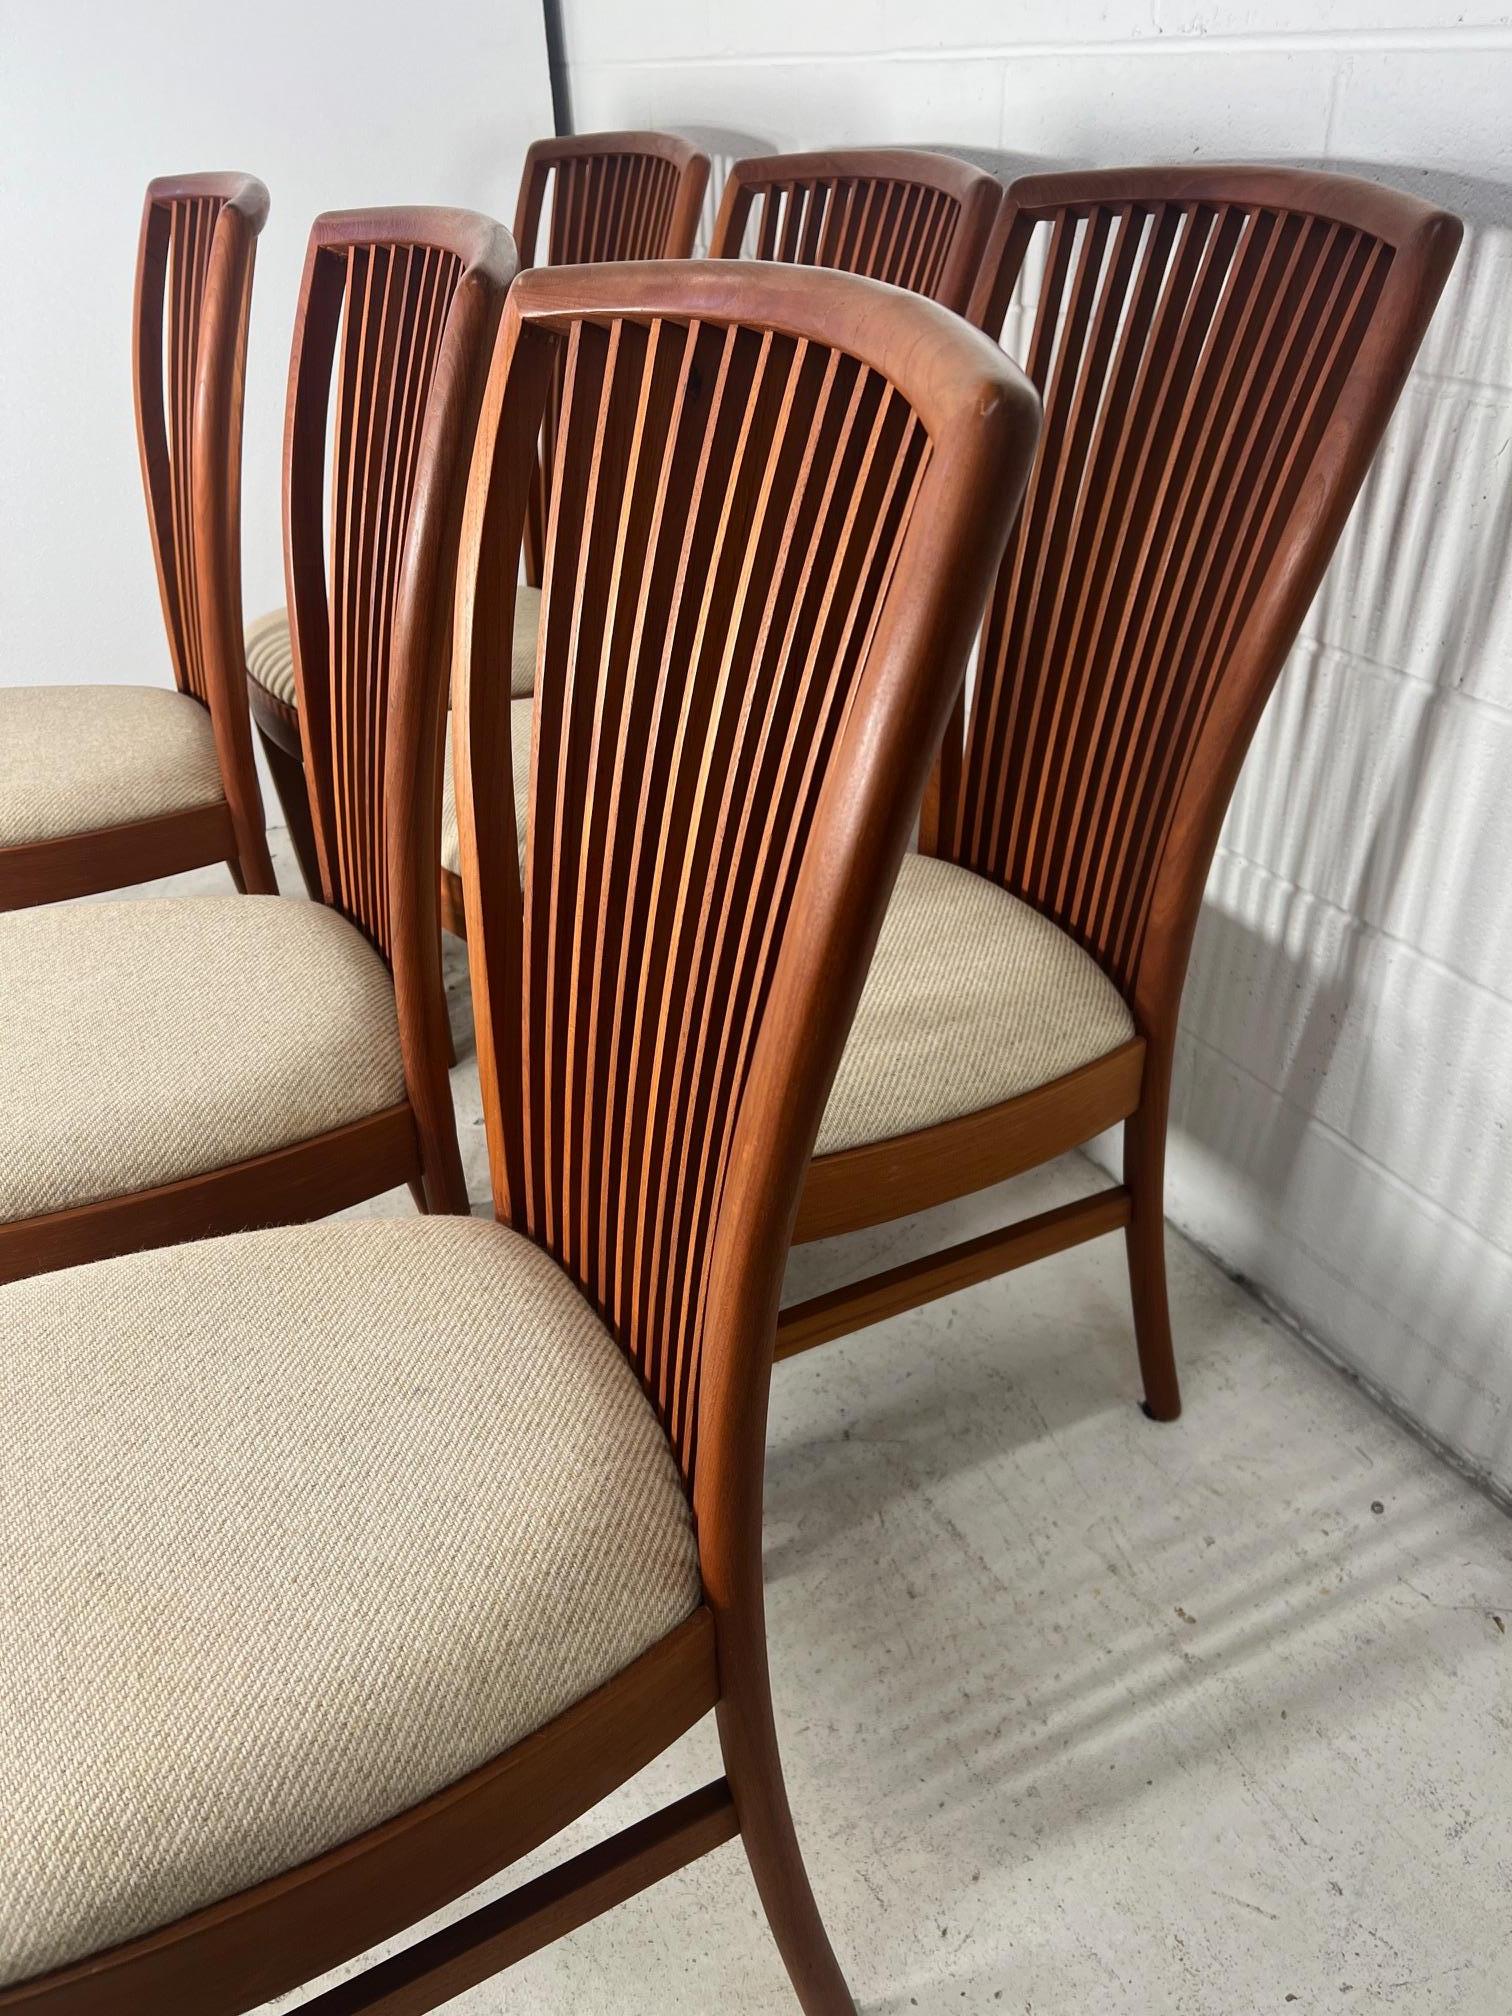 Thai Set Of 6 Mid Century Modern Teak Dining Chairs By Sun Cabinet For Sale